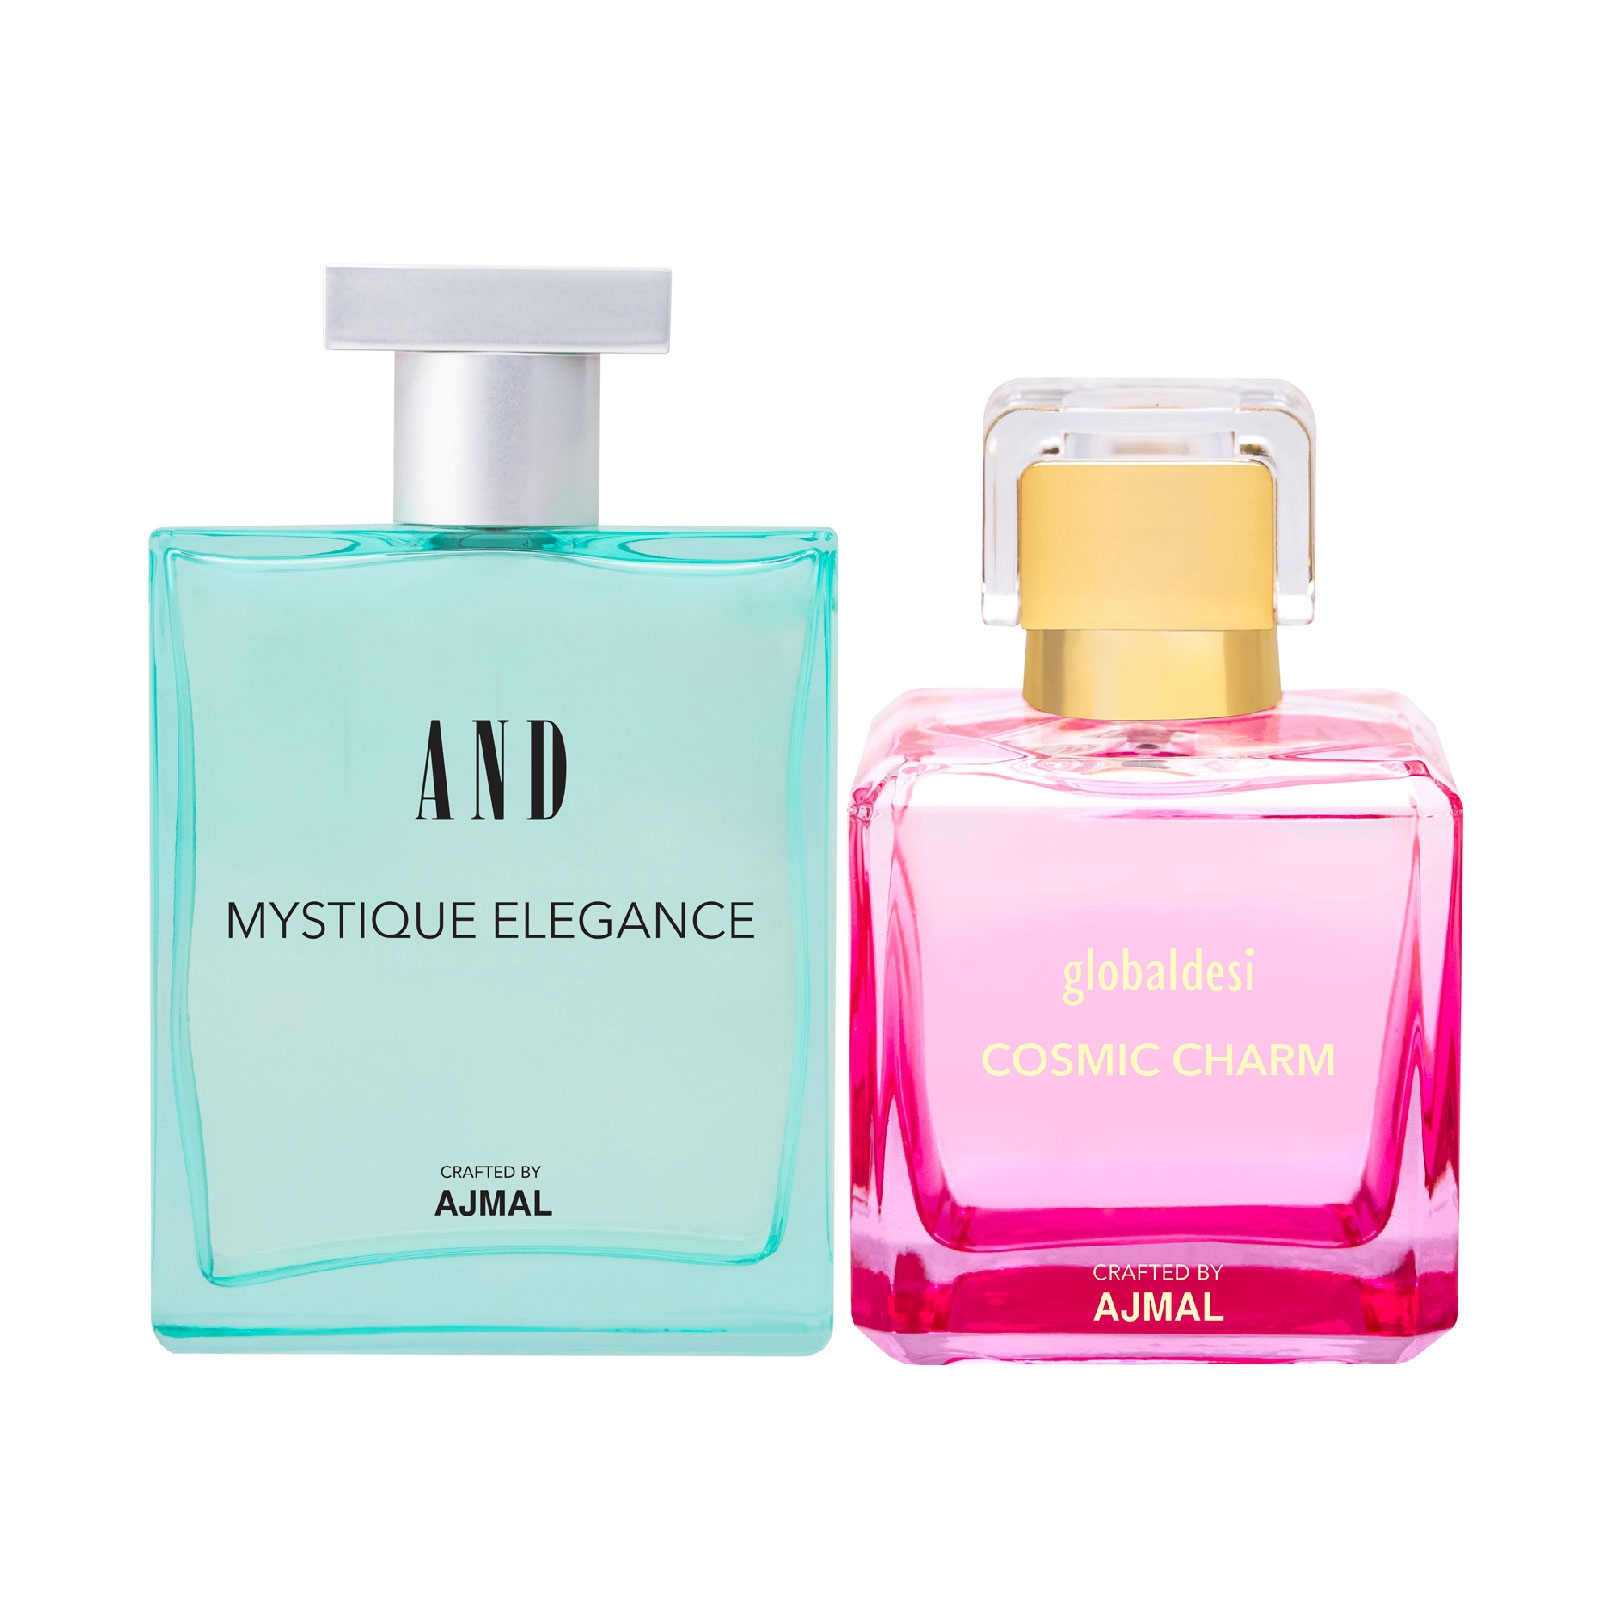 AND Crafted By Ajmal | AND Mystique Elegance EDP 50ML & Global Desi Cosmic Charm EDP 50ML 